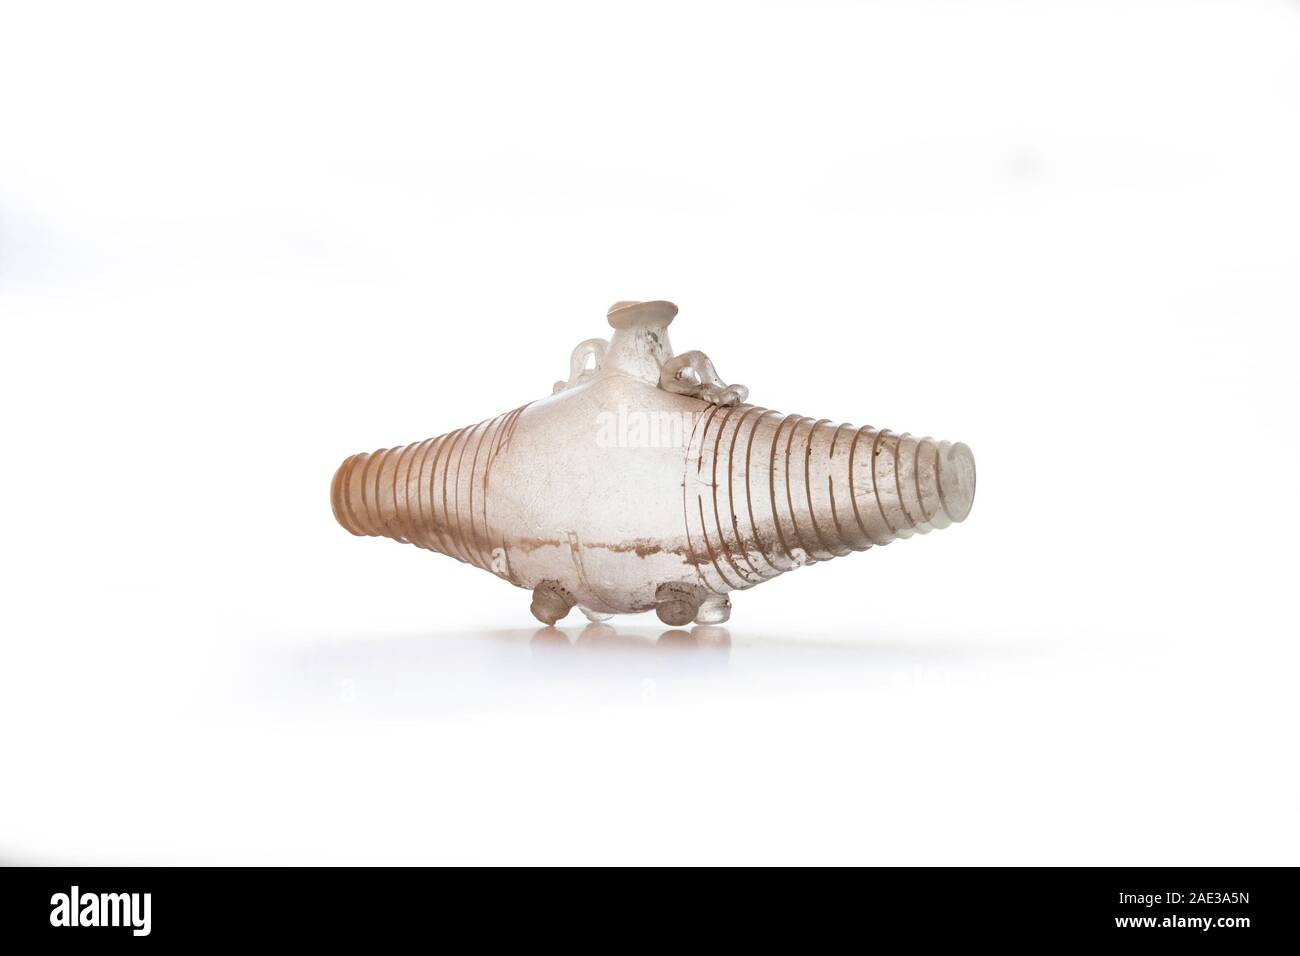 Ancient Roman glass jug in form of  barrel with glass thread decor. Natural-coloured Glass of the 1st and 2nd centuries AD. Clipping path for design p Stock Photo